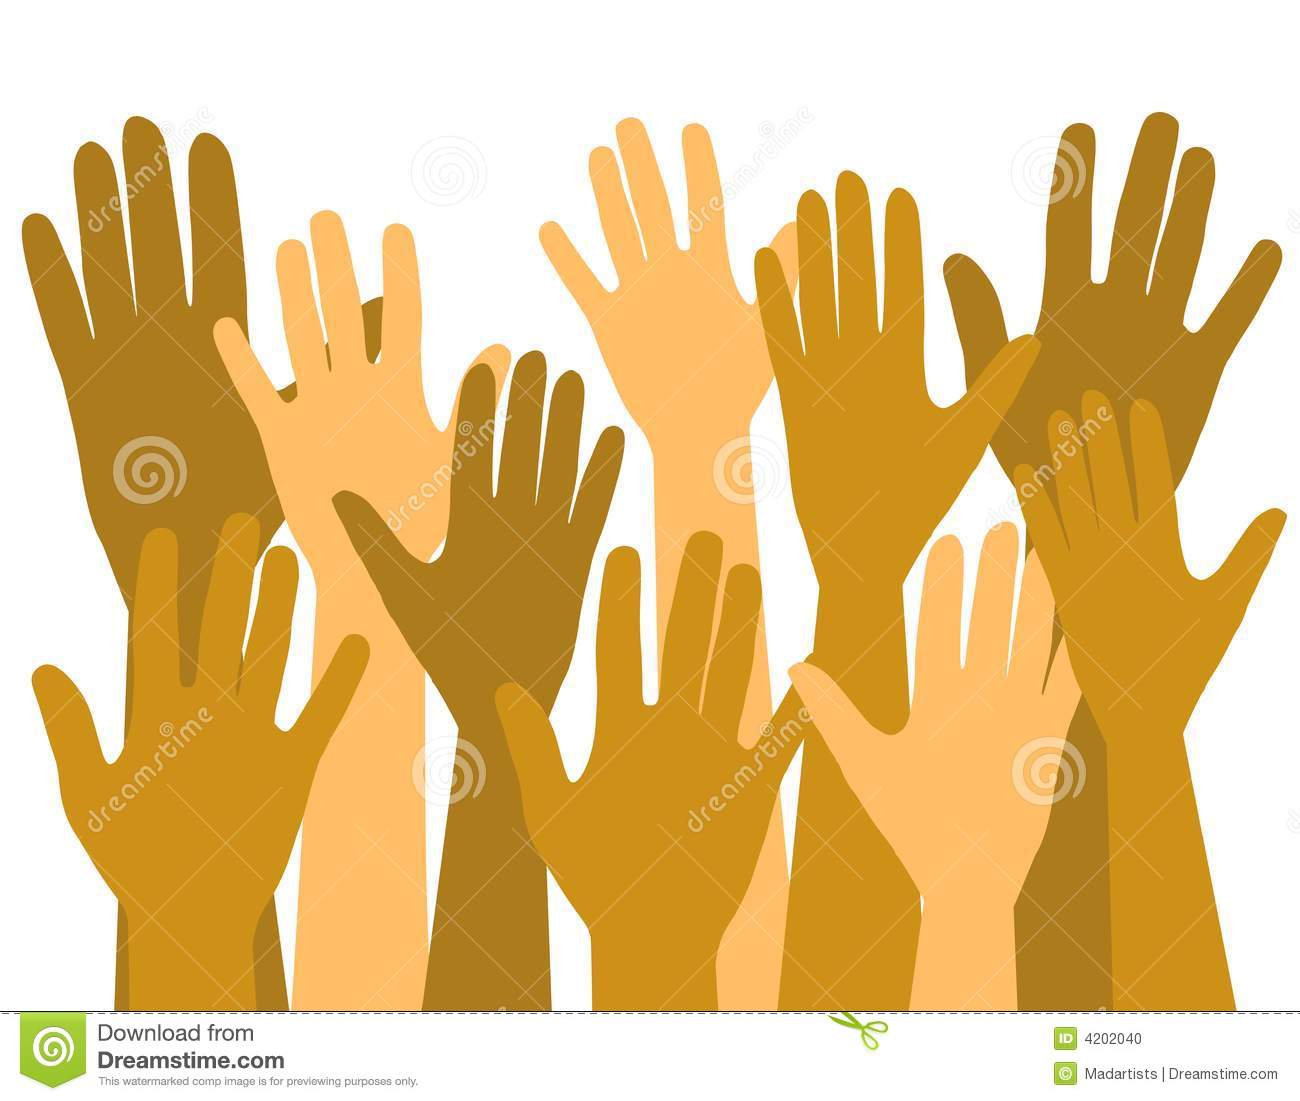 Voting clipart hand. Hands up in the